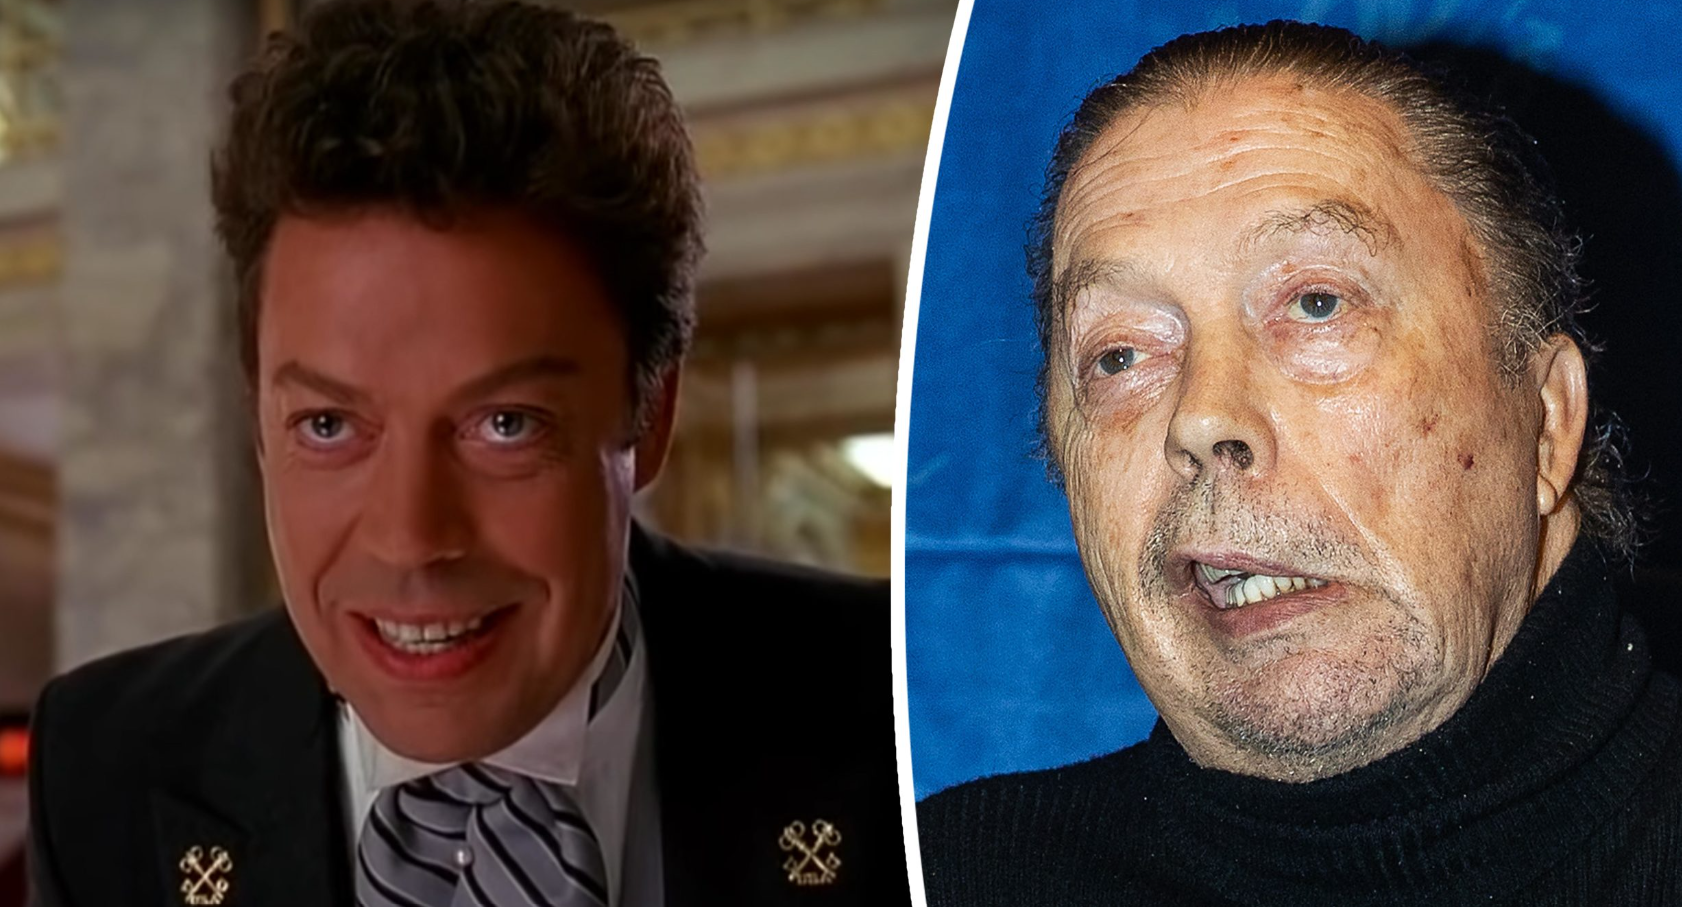 an image illustration of Tim Curry's Stroke and His Remarkable Comeback in the Filming Industry